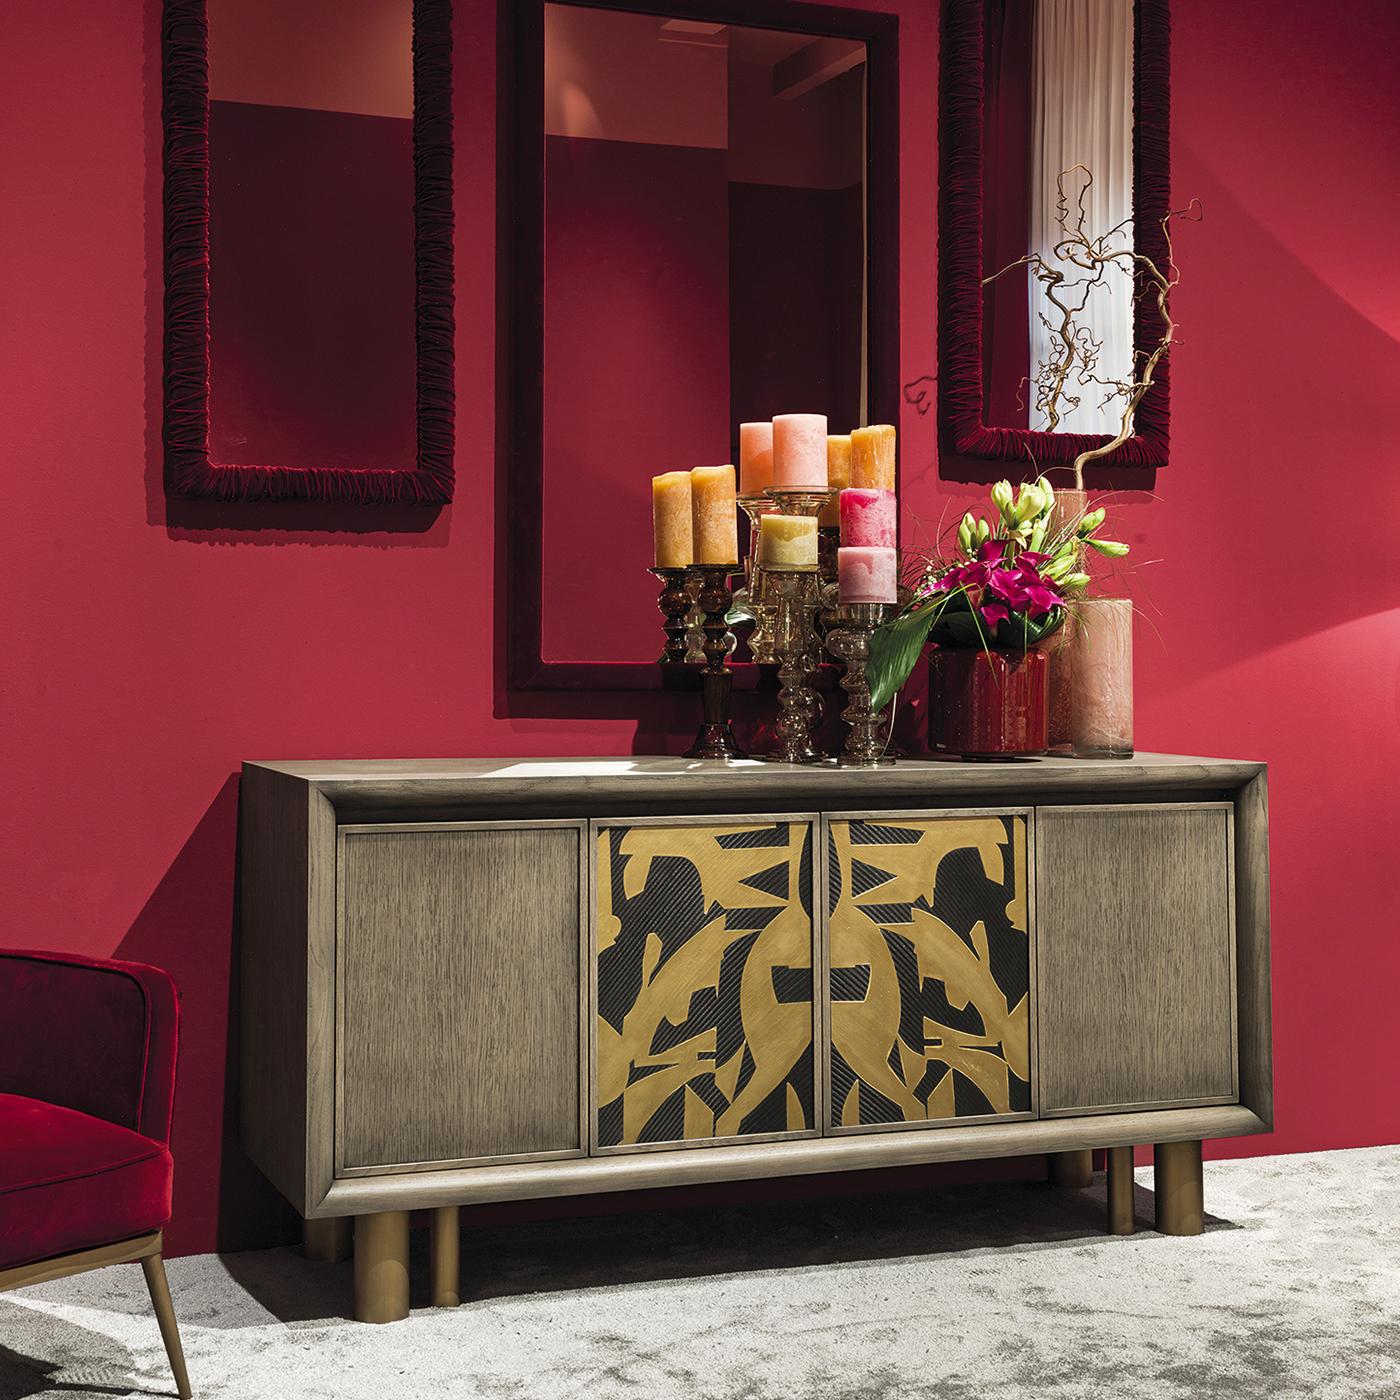 Proving things are often not as they seem, the Pierre mirror offers a fun surprise upon closer inspection. From a distance, it would appear to be a simple rectangular mirror, however, moving closer, one can see the original red velvet frame, making